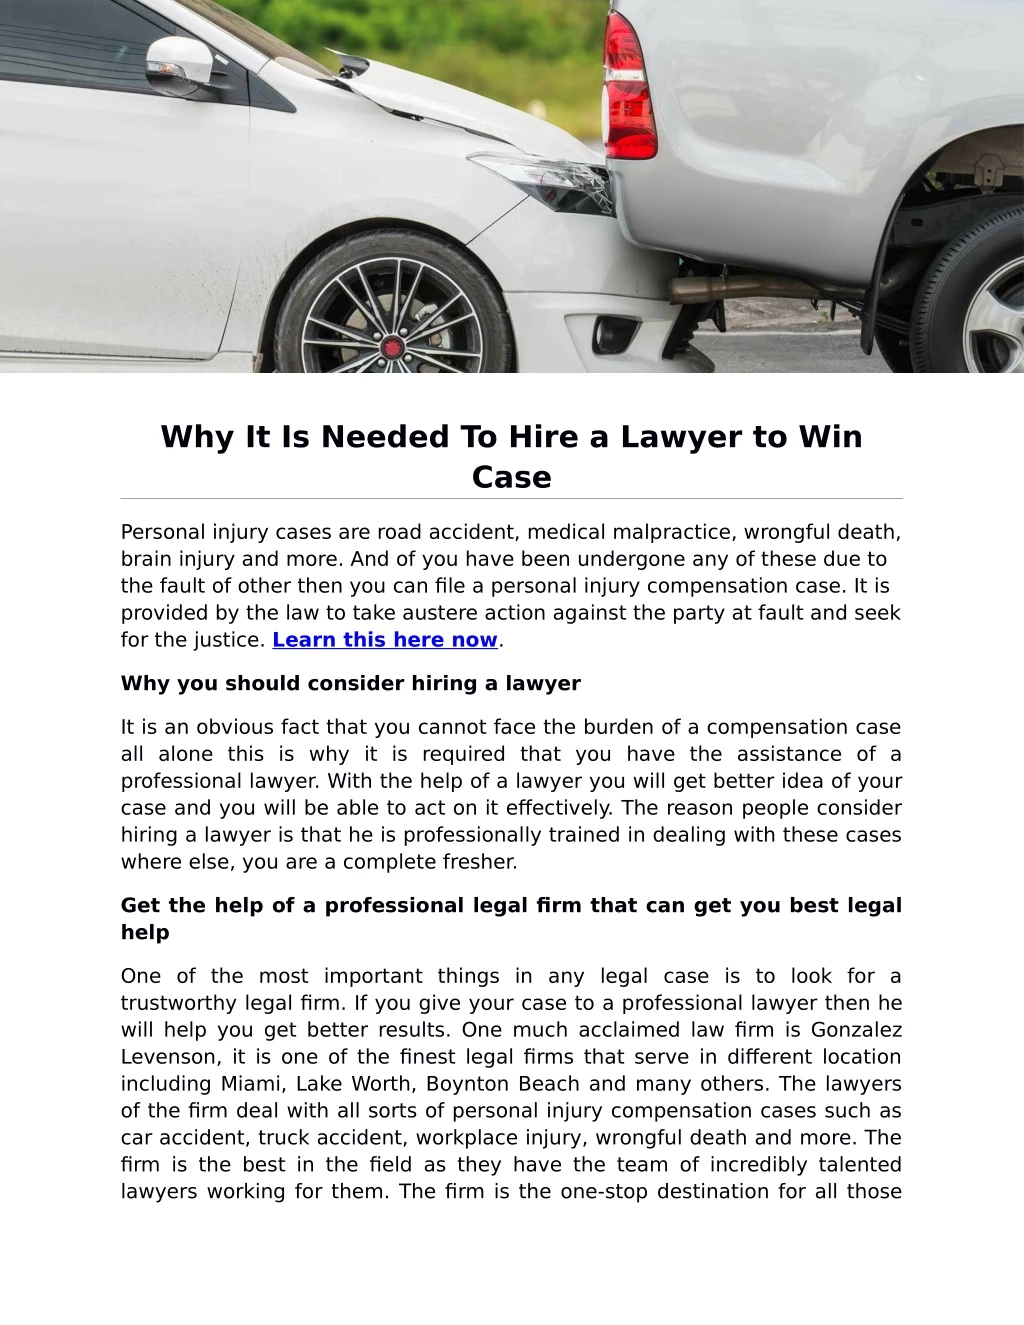 why it is needed to hire a lawyer to win case